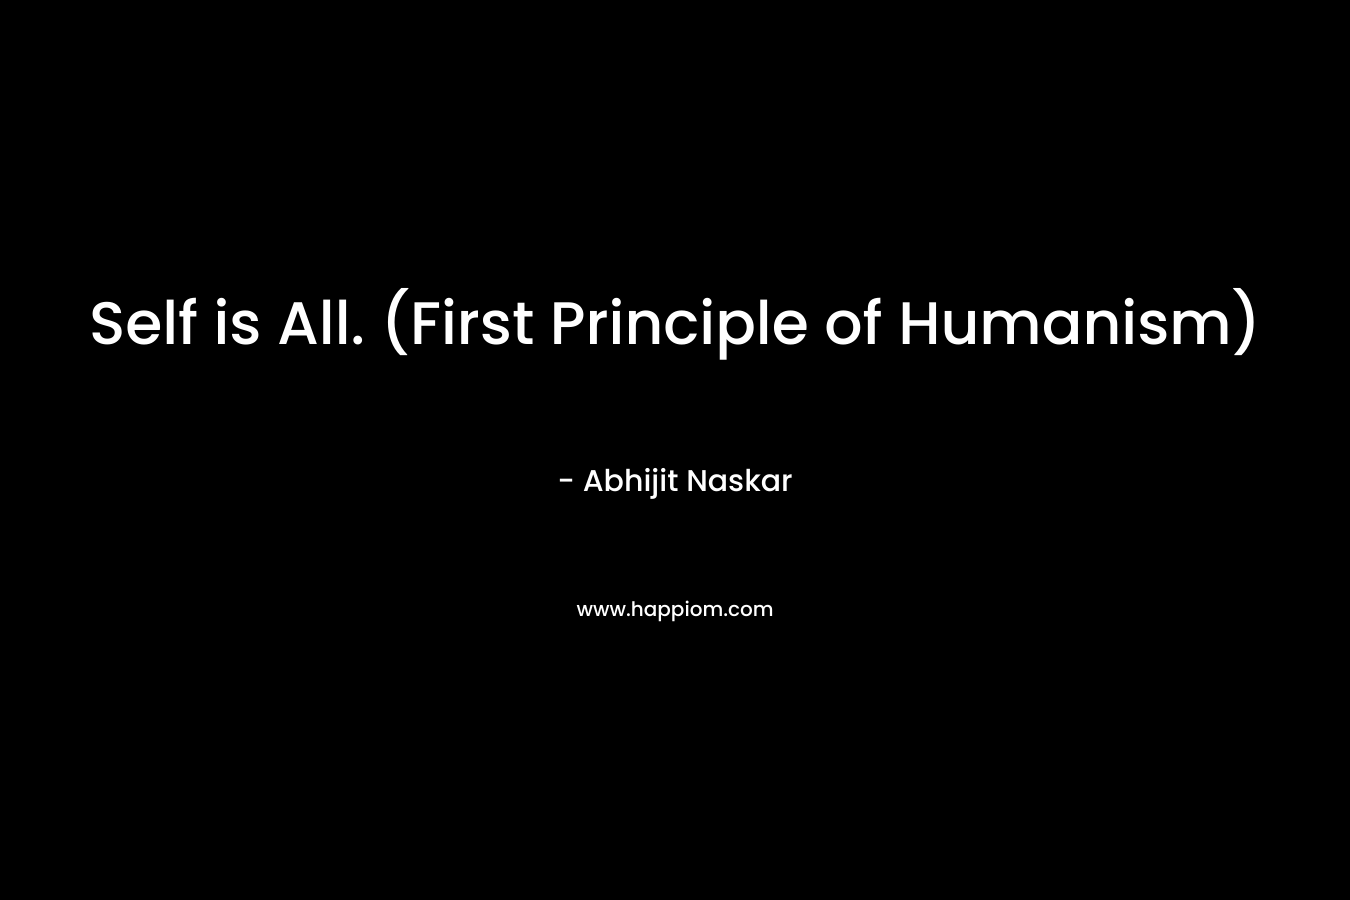 Self is All. (First Principle of Humanism)